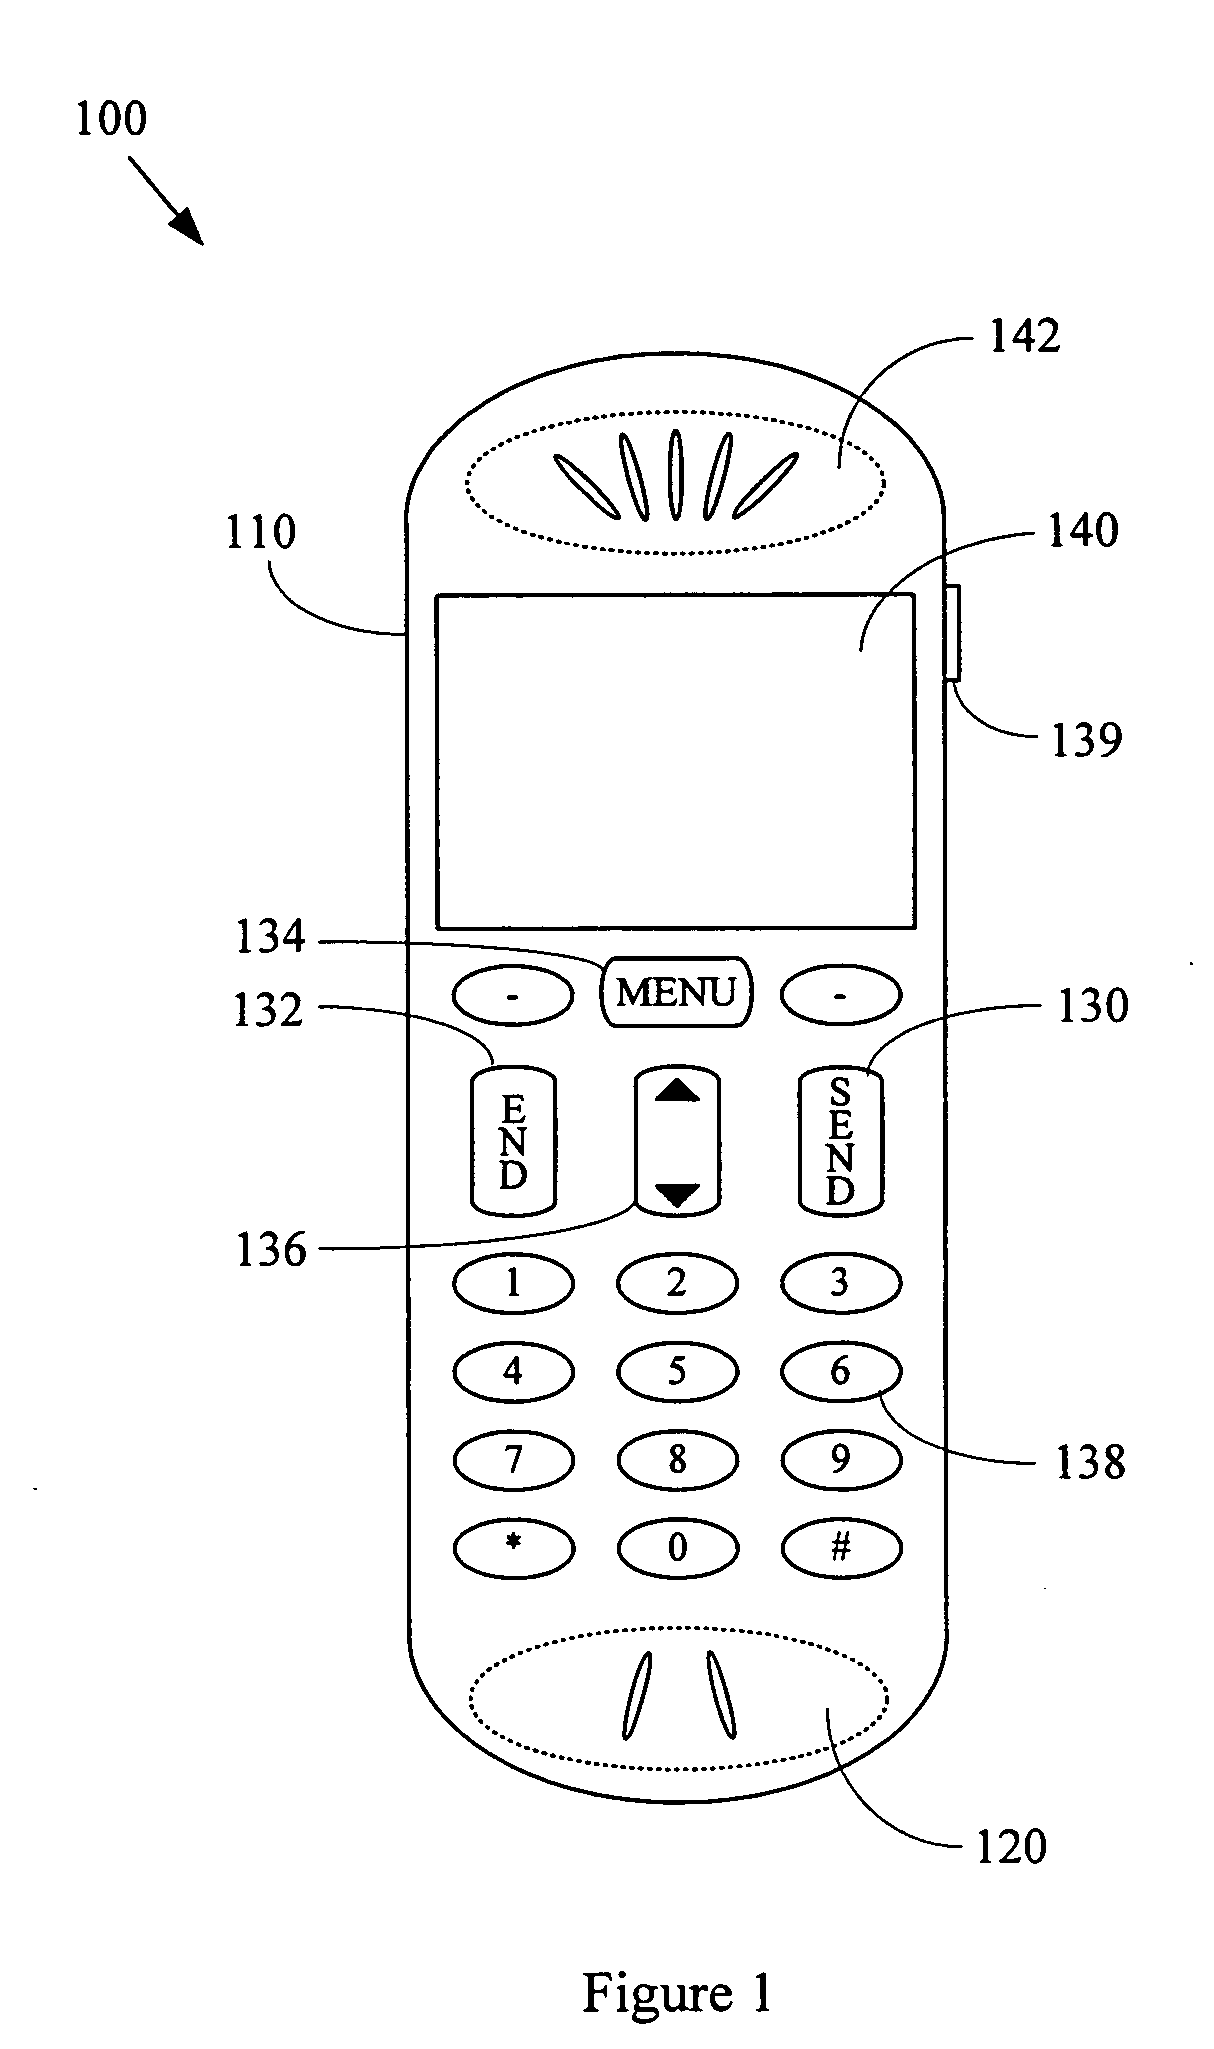 Mobile communication device and other devices with cardiovascular monitoring capability